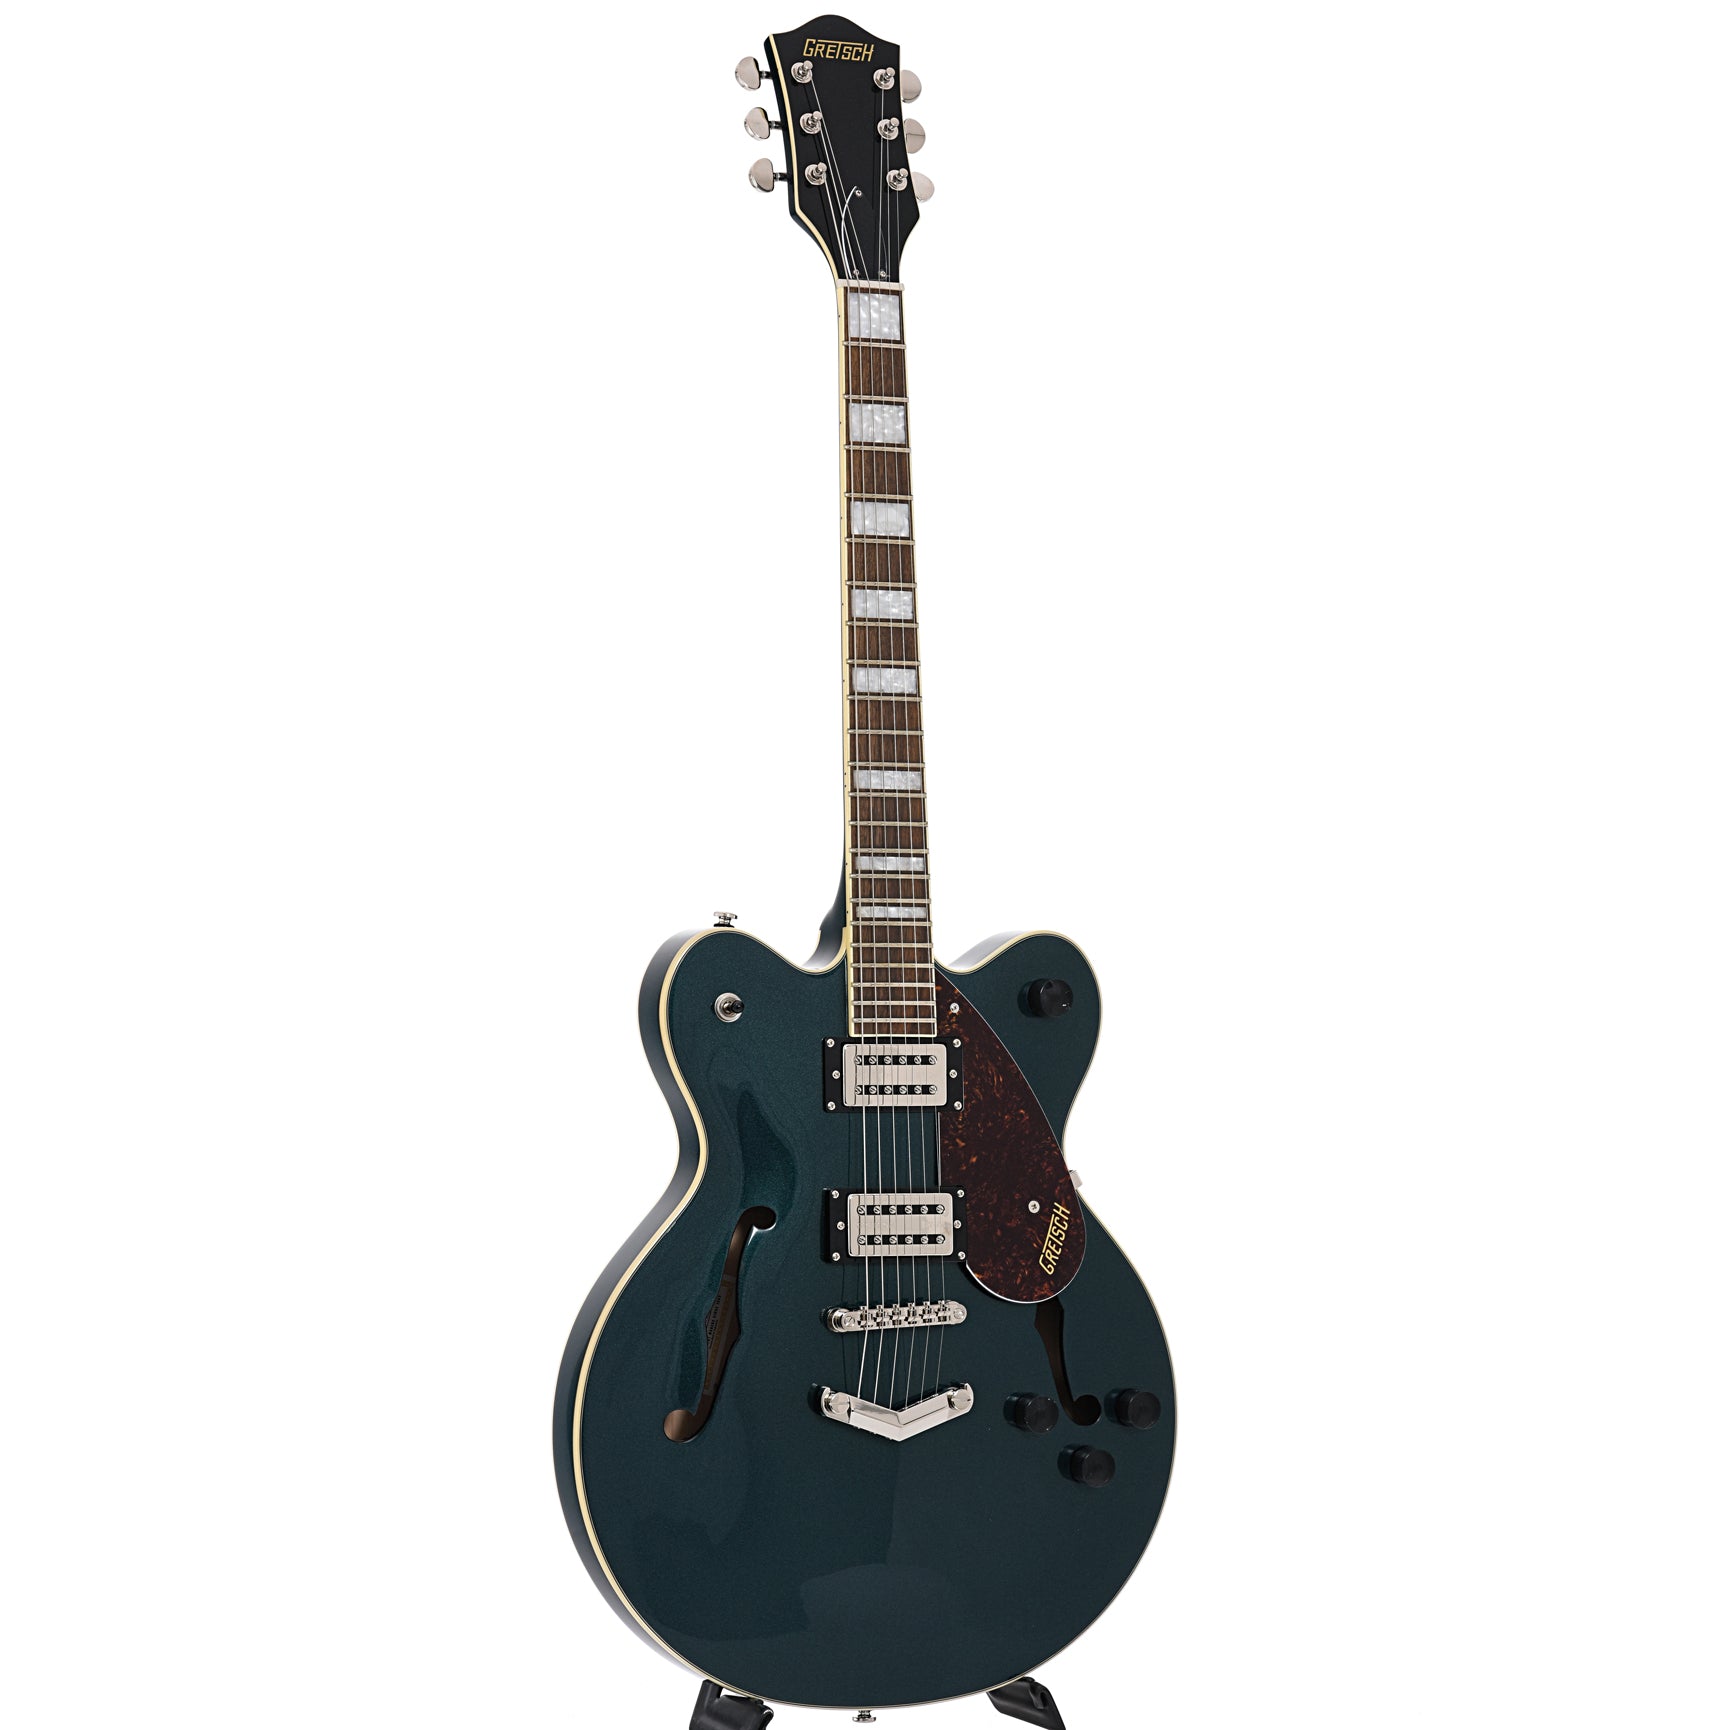 Image 11 of Gretsch G2622 Streamliner Center-Block Double Cutaway Hollow Body Guitar, Midnight Sapphire- SKU# G2622-MDSPH : Product Type Hollow Body Electric Guitars : Elderly Instruments